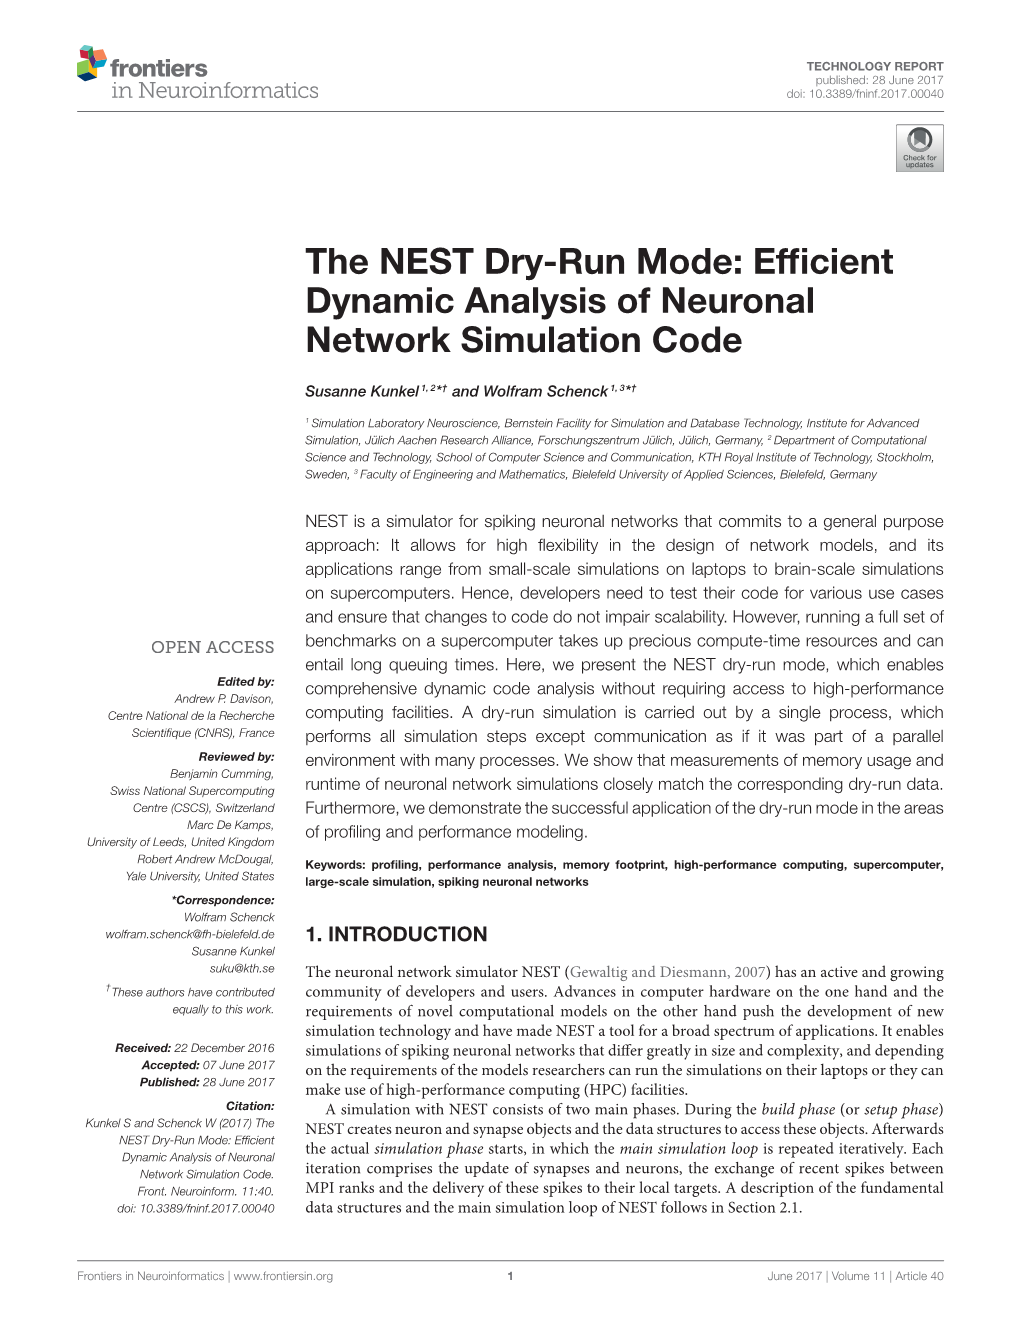 Efficient Dynamic Analysis of Neuronal Network Simulation Code